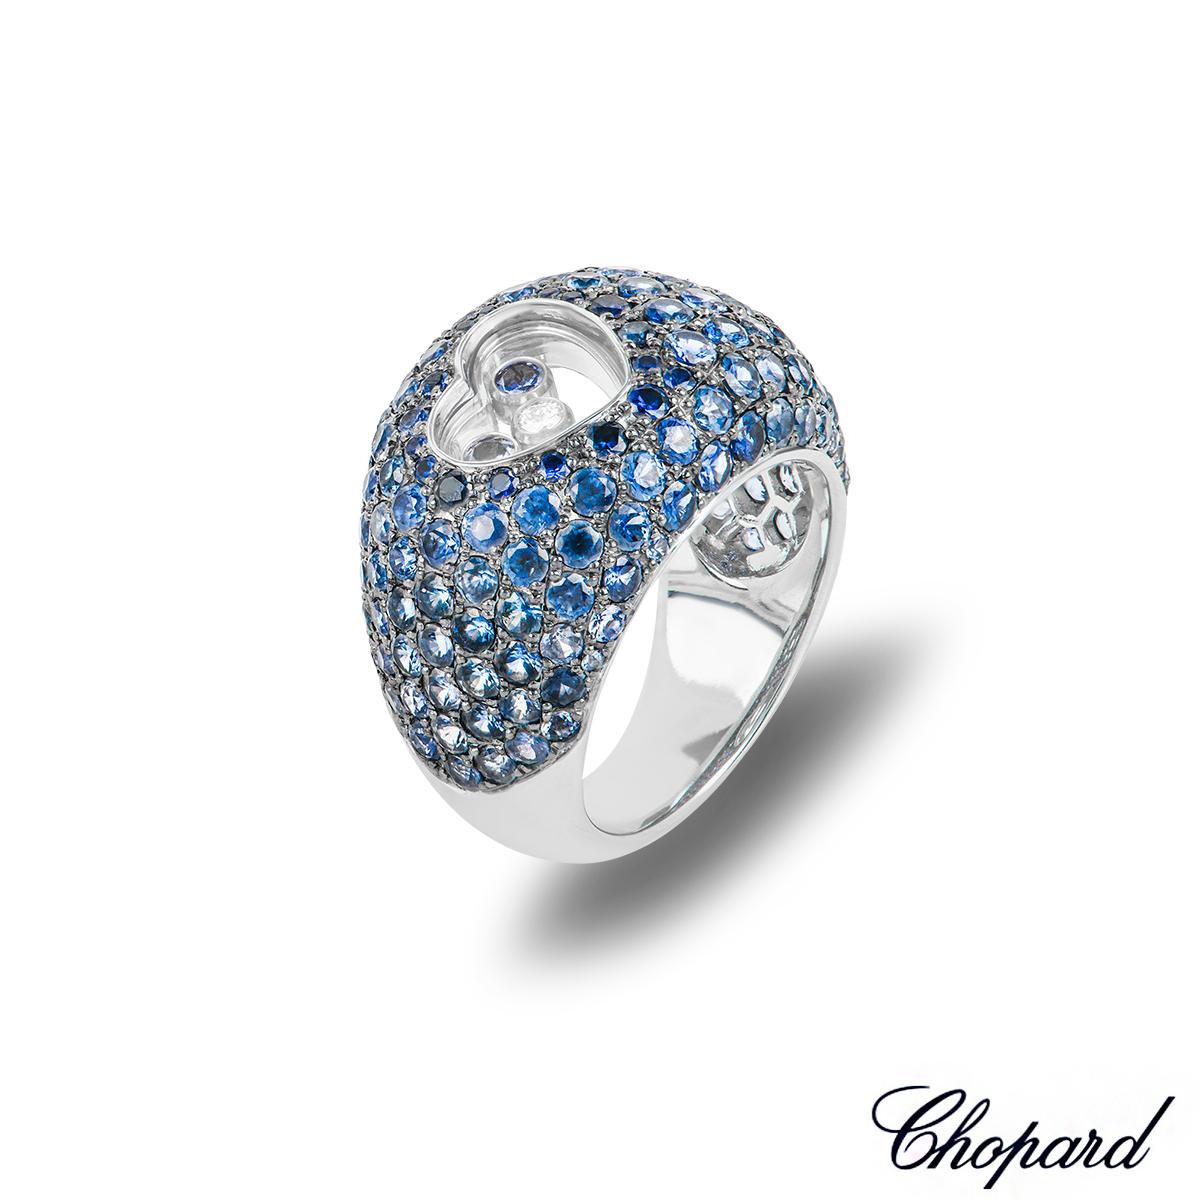 A sensational 18k white gold sapphire and diamond ring by Chopard. The ring features a heart motif set left of centre encasing a single floating round brilliant cut diamond weighing 0.05ct and 2 floating sapphires each weighing 0.05ct. Complementing